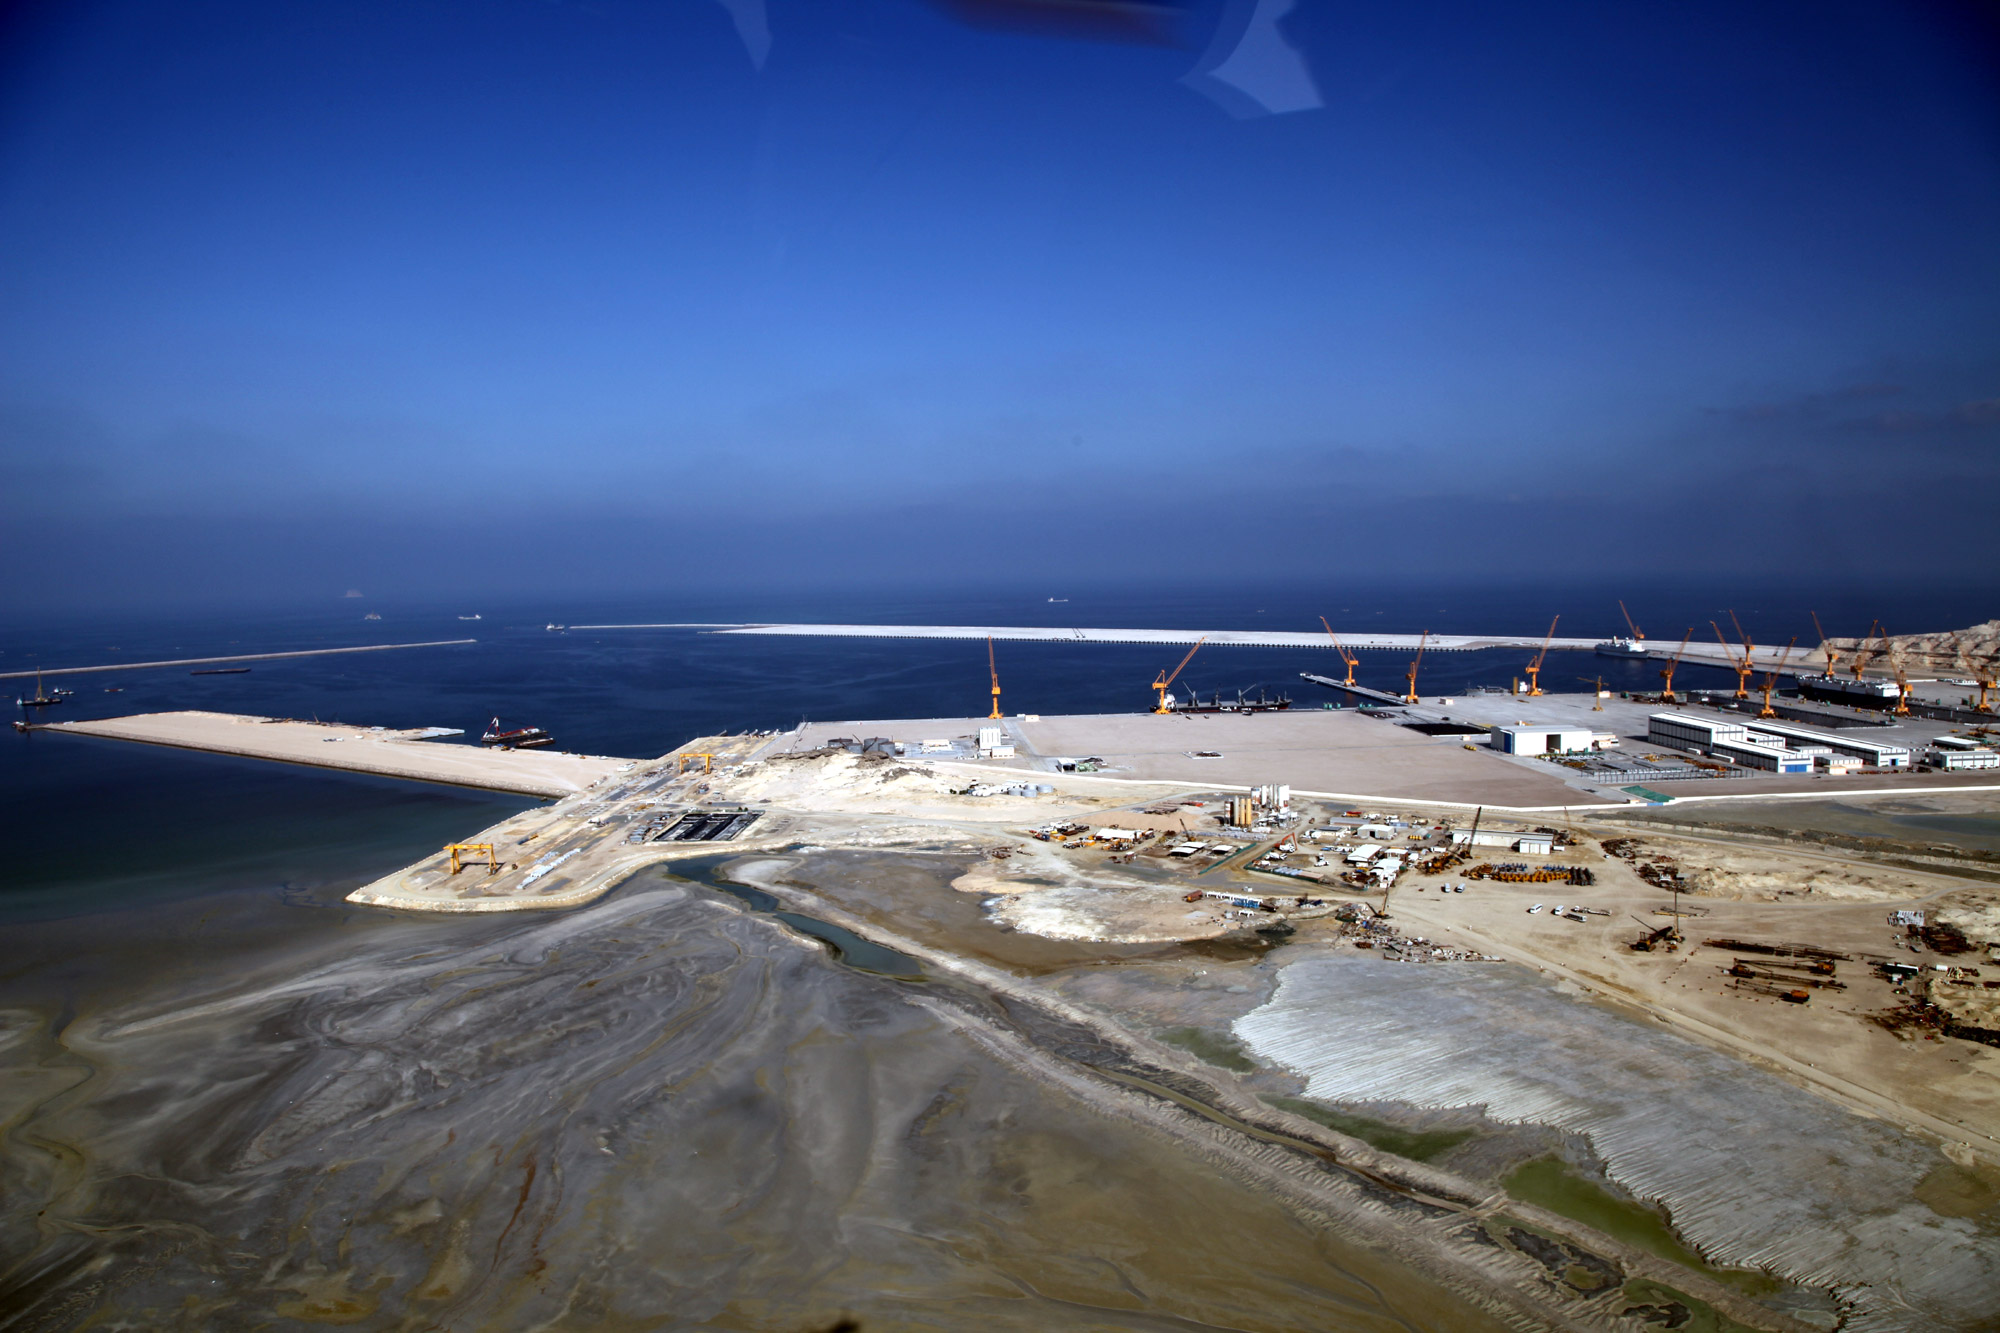 Duqm port work to be completed by end-2019, says CEO